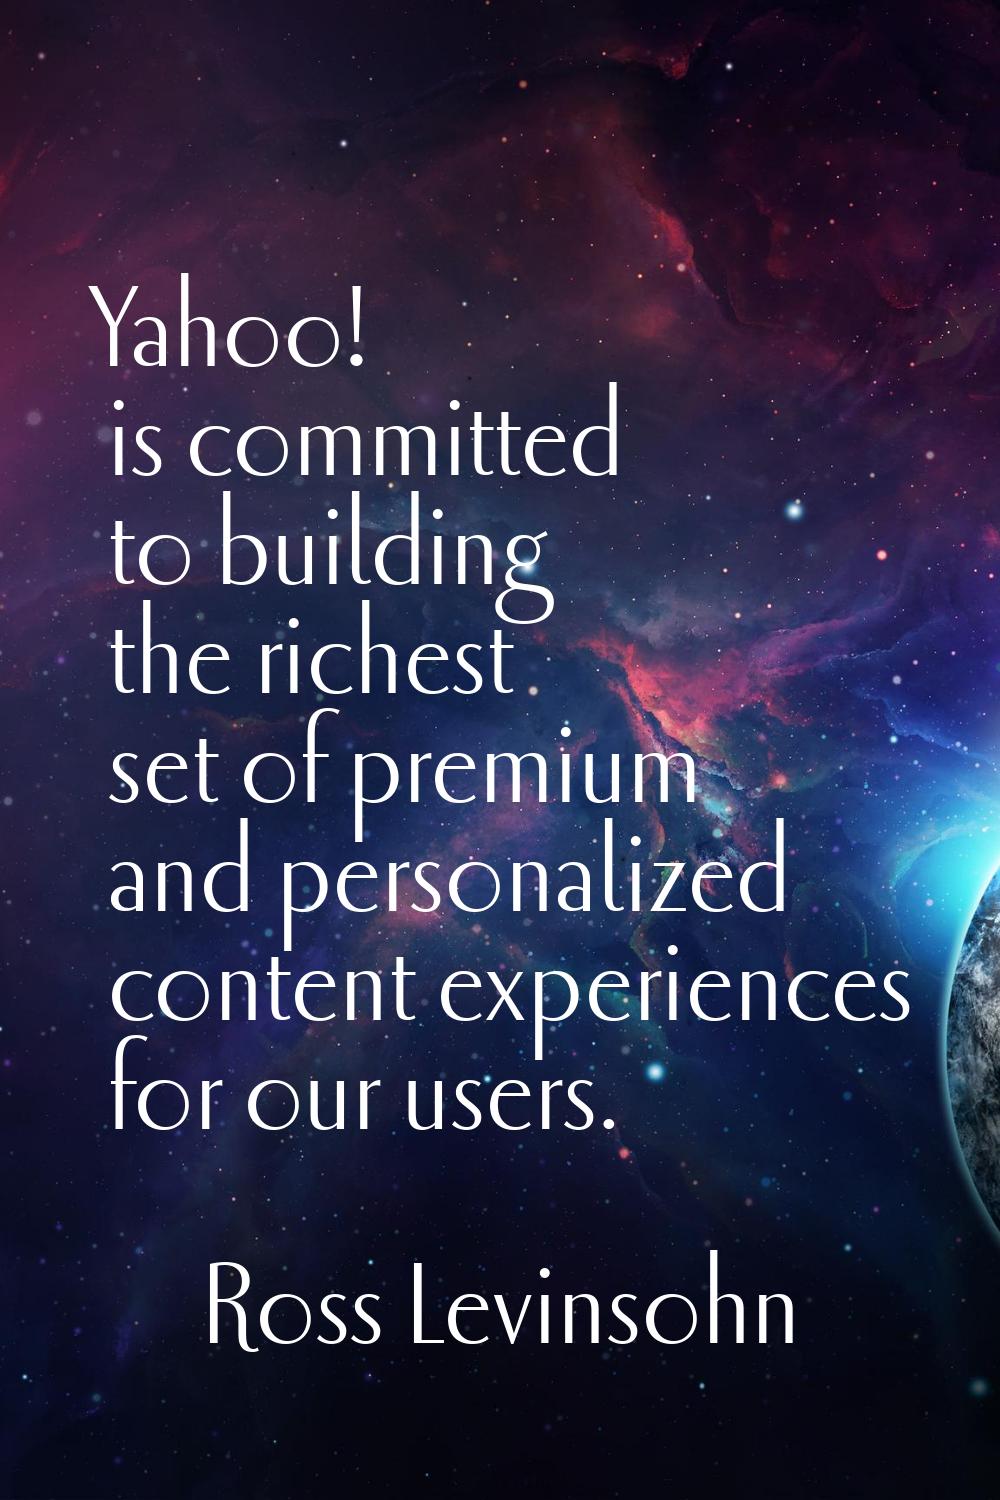 Yahoo! is committed to building the richest set of premium and personalized content experiences for